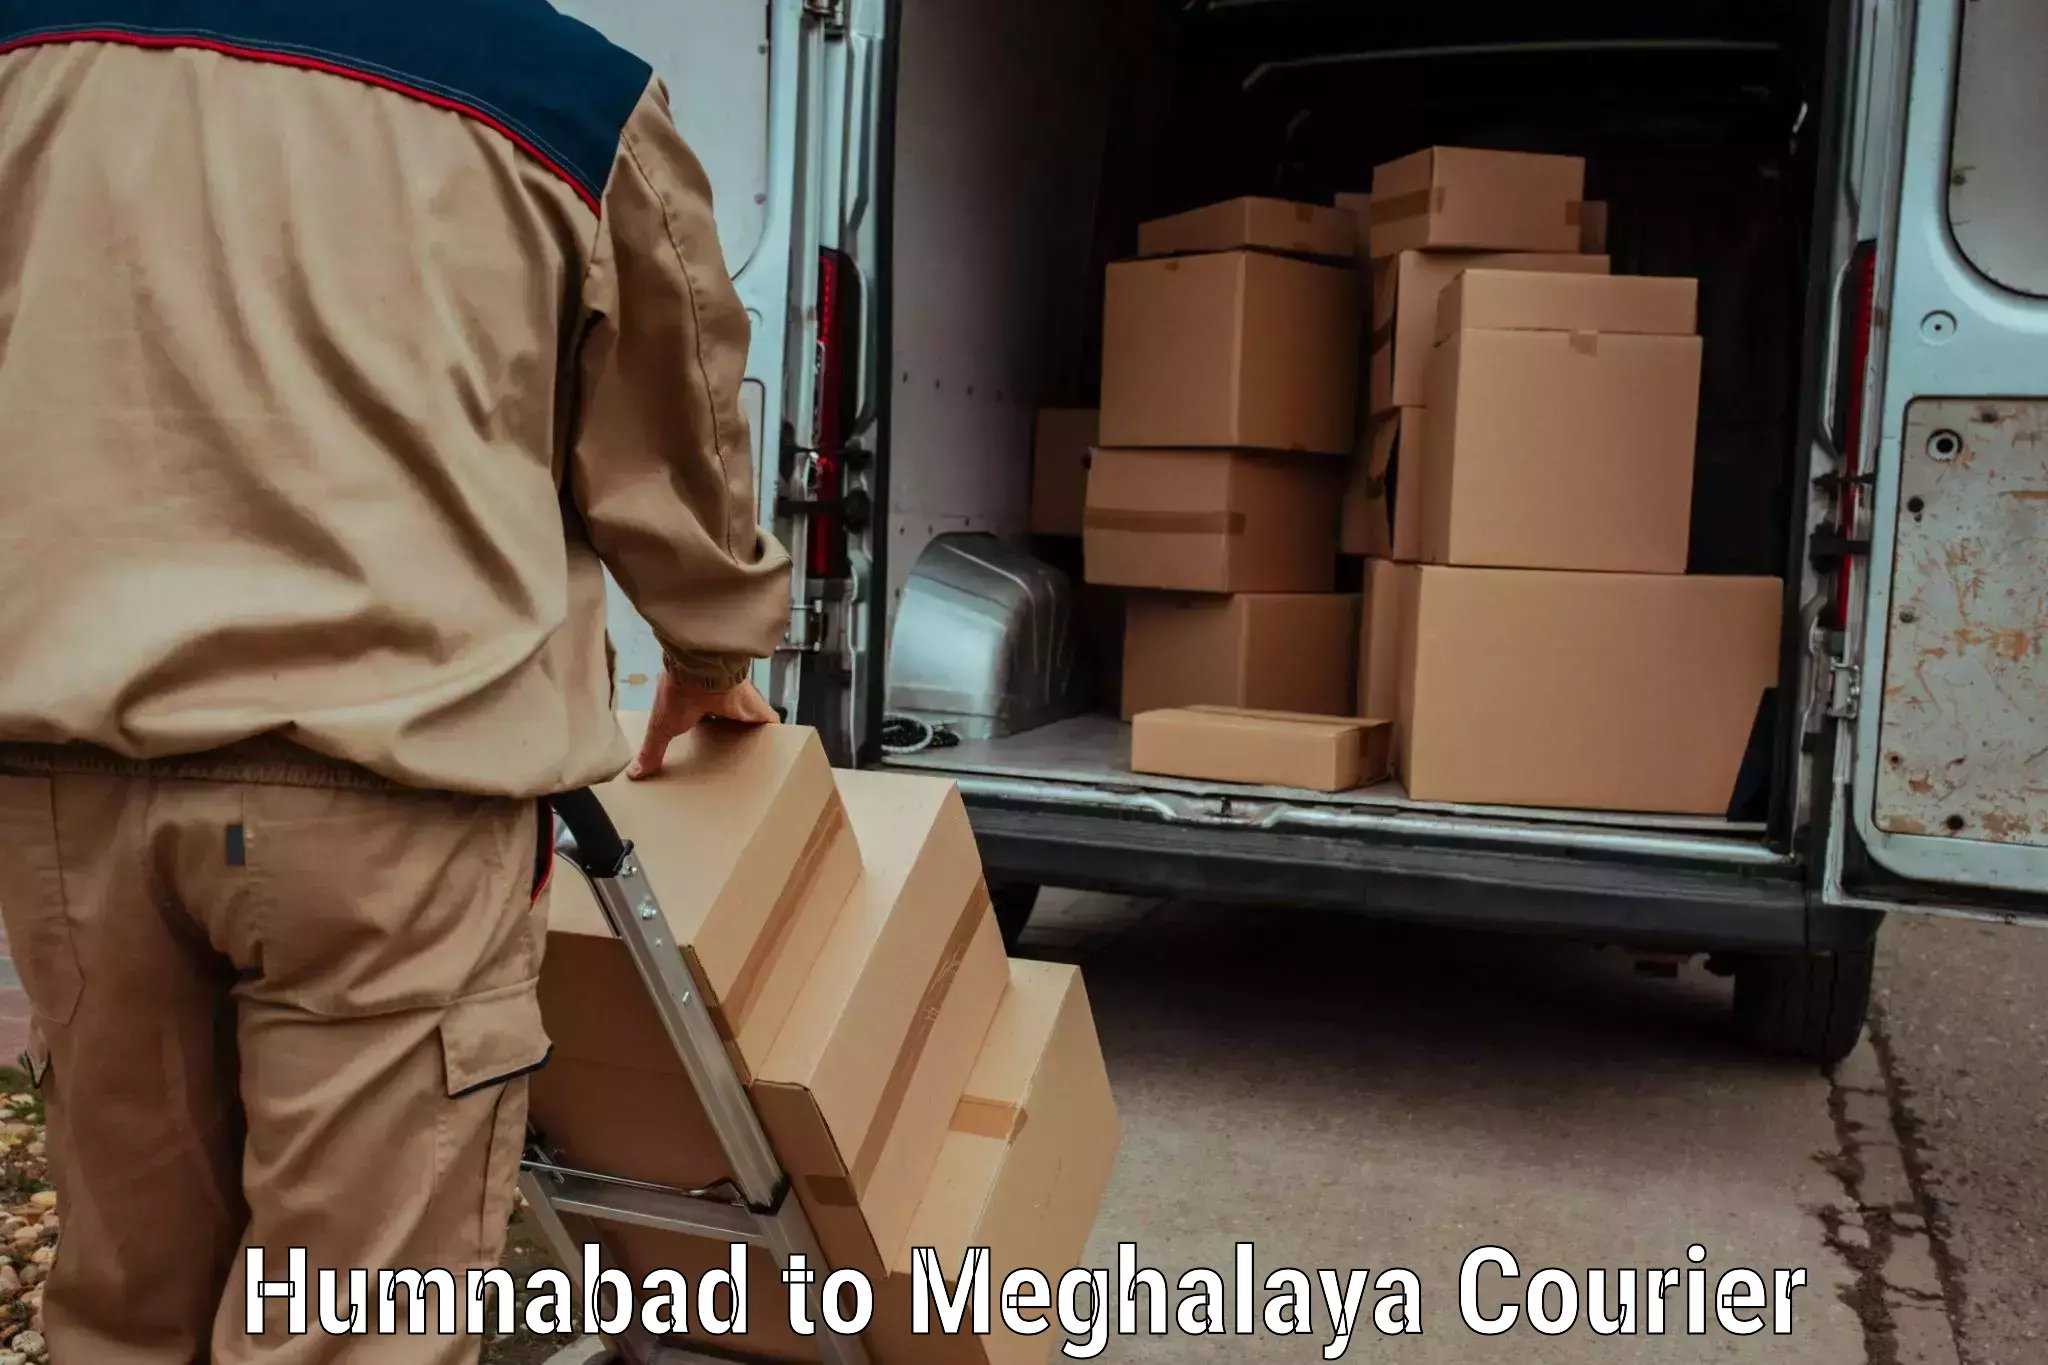 Easy access courier services in Humnabad to Tikrikilla